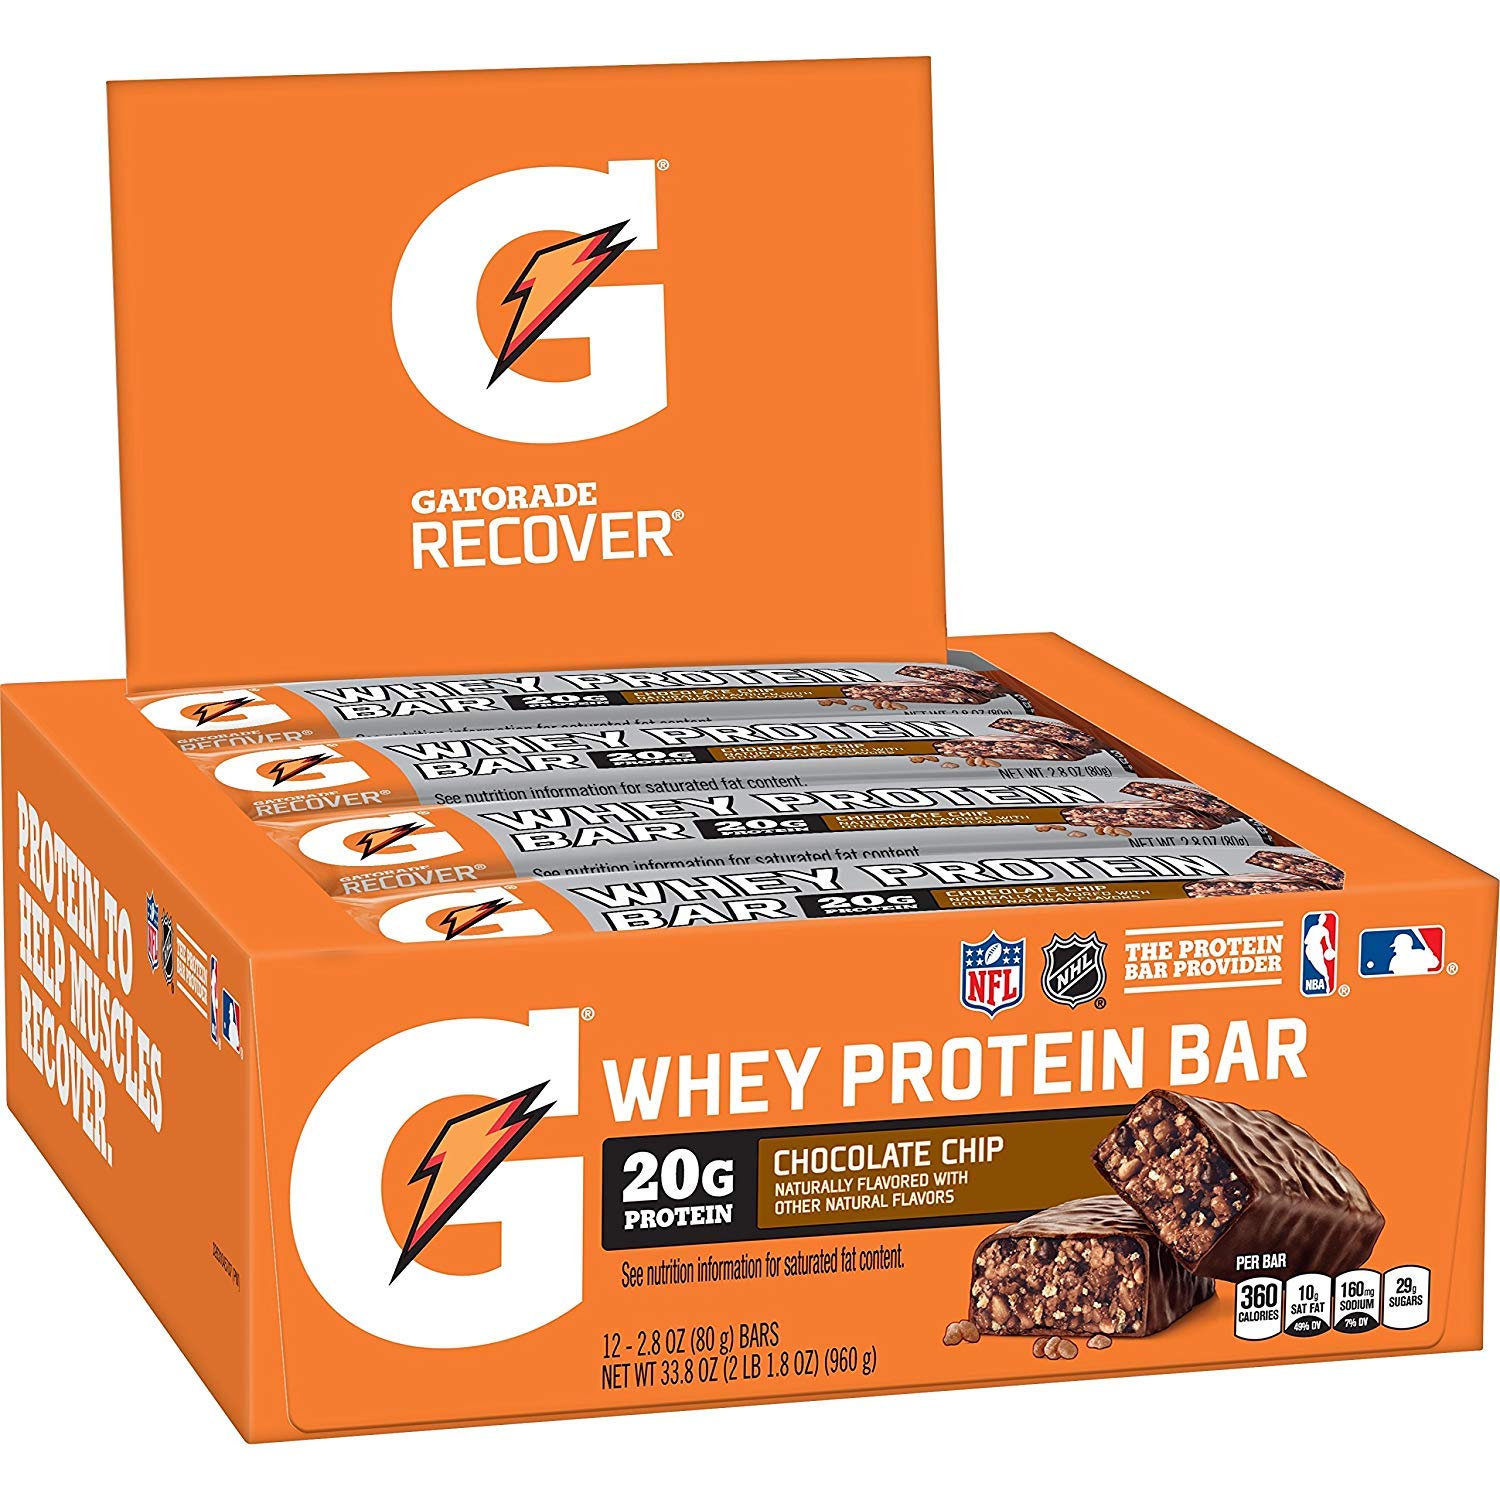 gatorade Whey Protein Recover Bar chocolate chip 2.8 Ounce Bars (12 count)